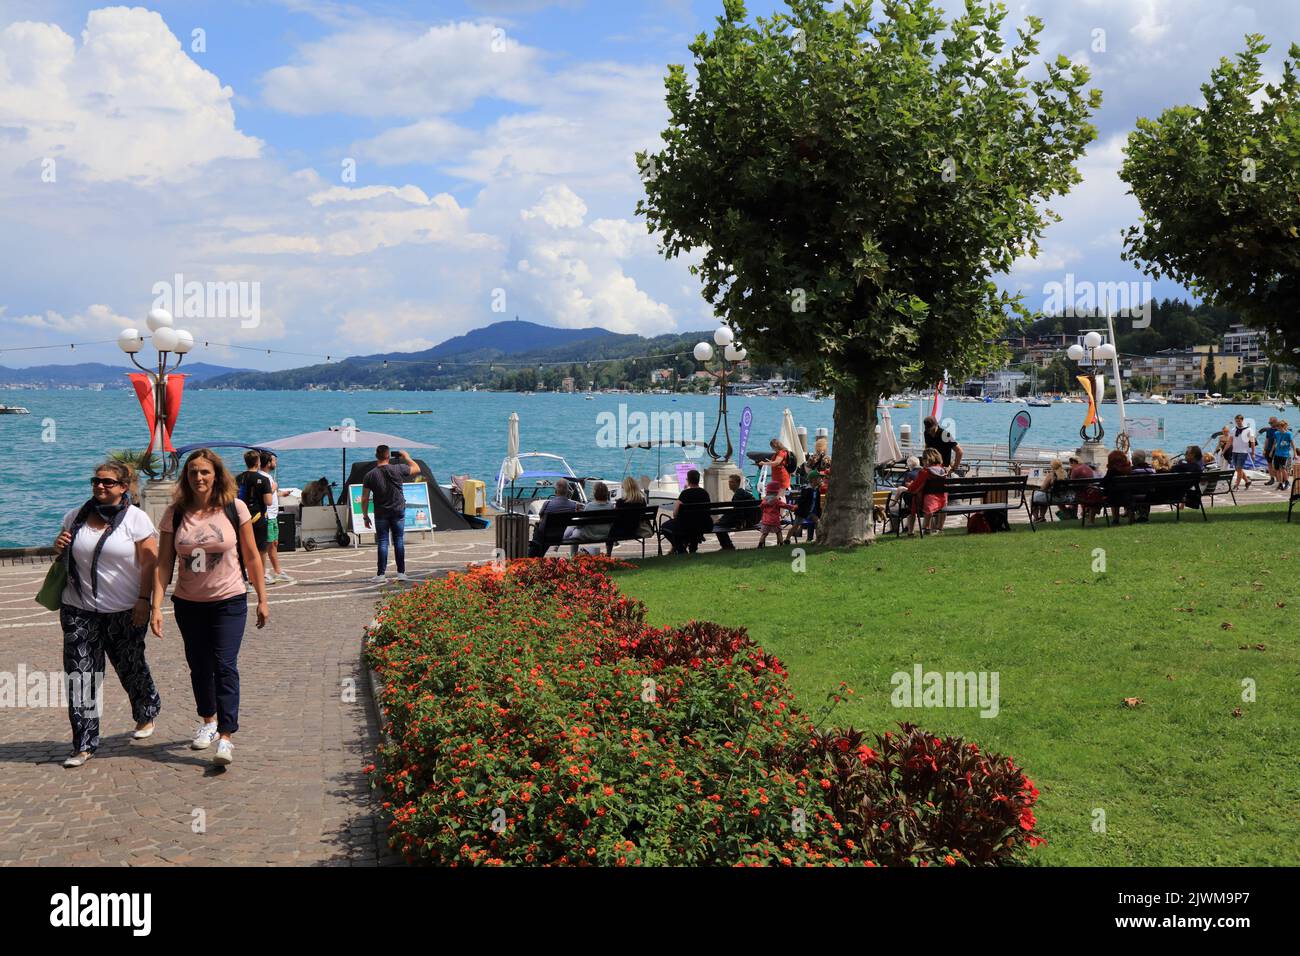 VELDEN AM WORTHER SEE, AUSTRIA - AUGUST 12, 2022: People visit lake Worthersee in Velden Am Worther See resort town in Carinthia, Austria. Stock Photo